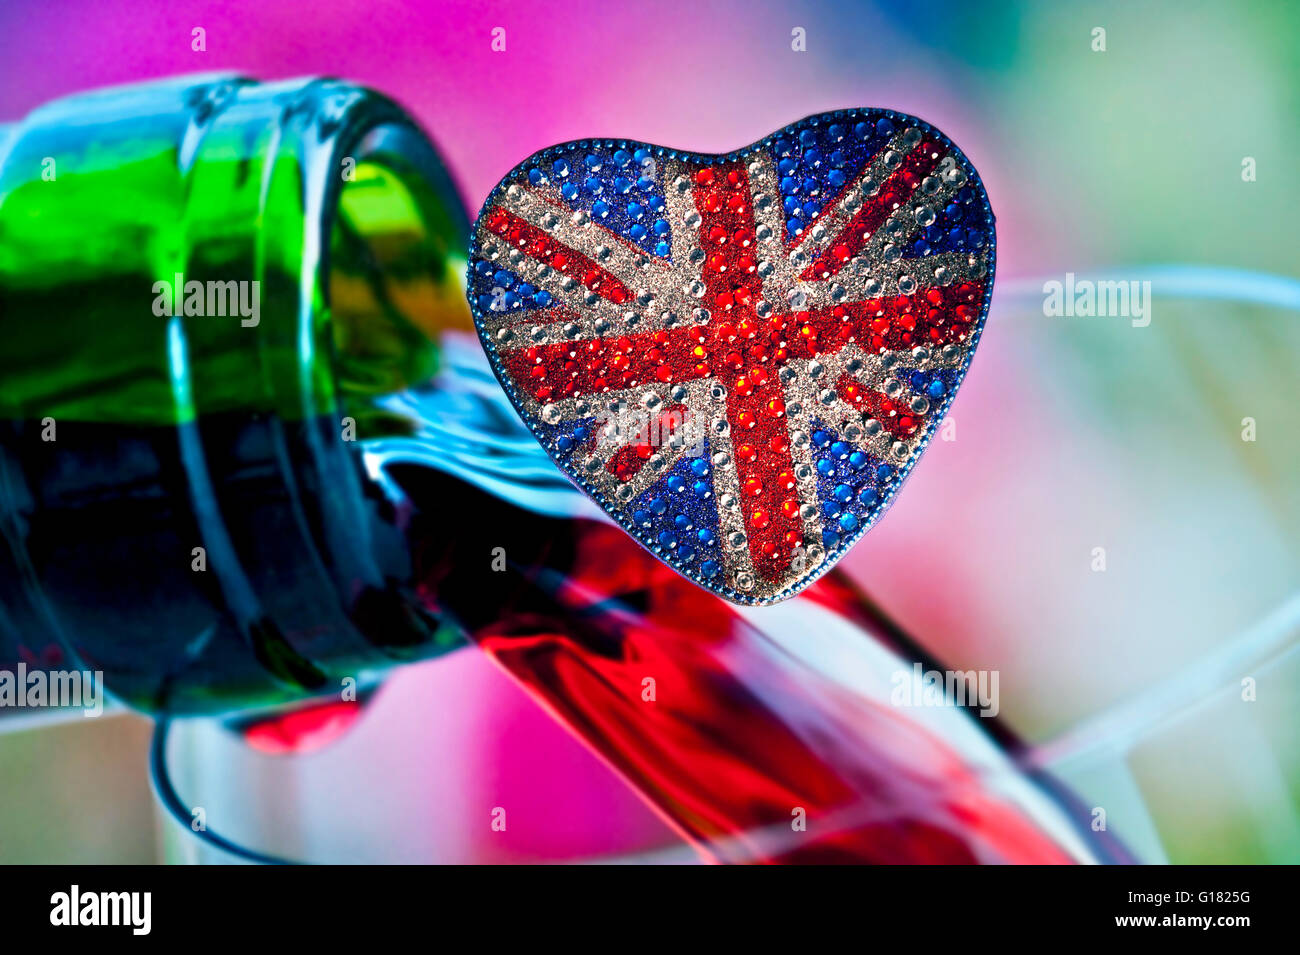 English wine concept with love heart shaped reflective sparkling Union Jack Flag motif & colorful wine bottle pouring behind Stock Photo